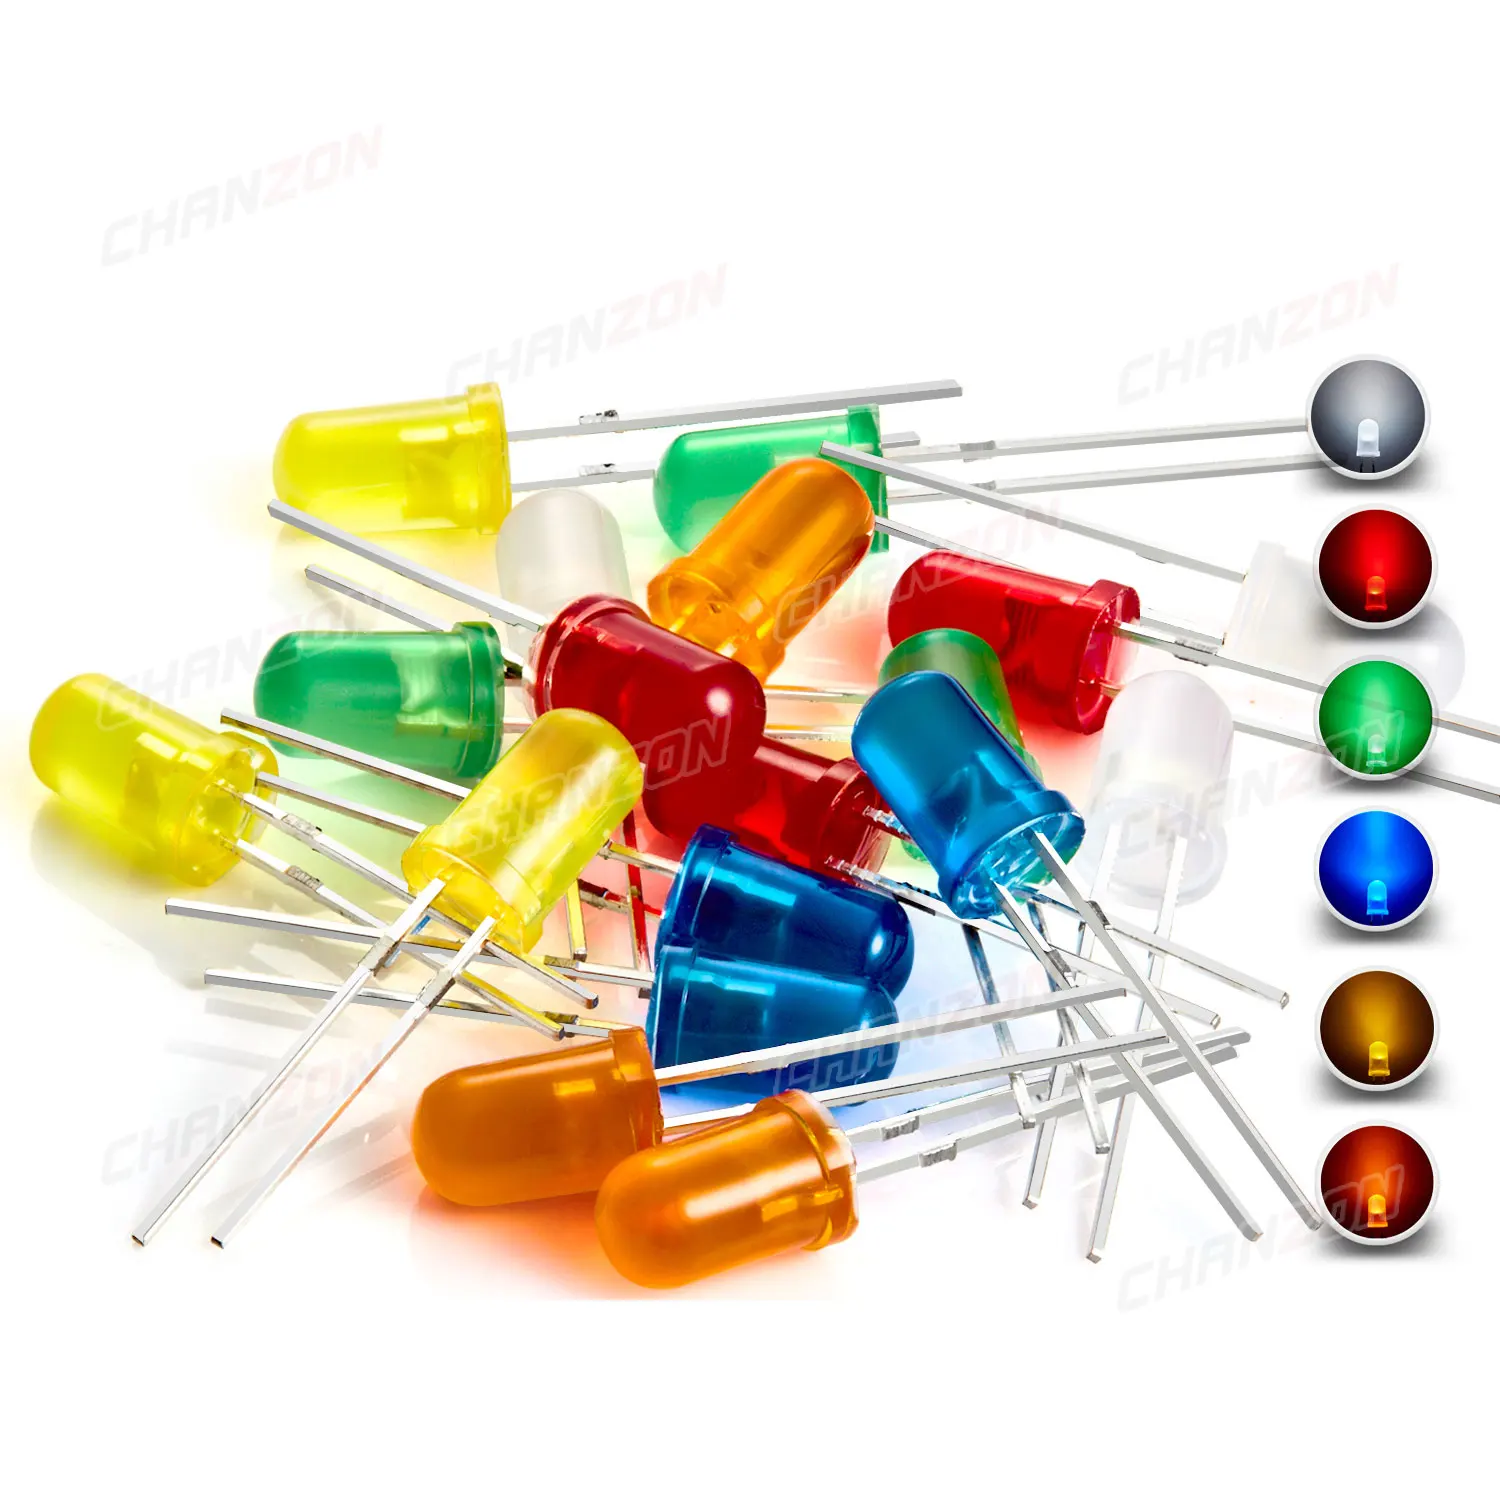 100pcs 5mm LED Diode White Red Yellow Green Blue Orange Diffused Round Lens Super Bright 3V DIP Lamp 5 mm Light Emitting Diodes